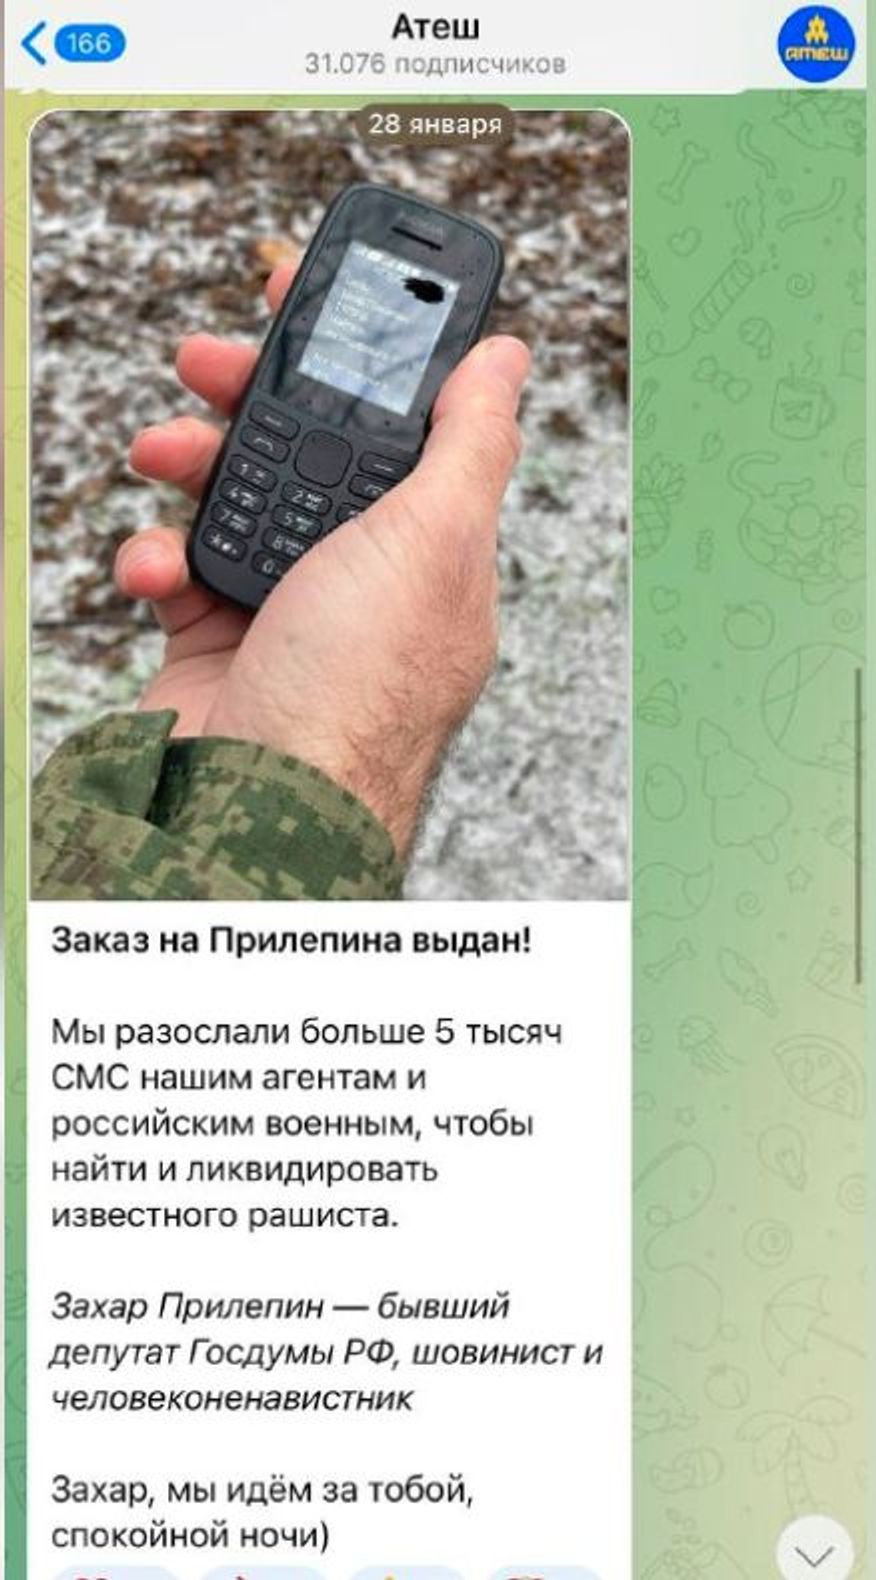 An order for Prilepin has been issued! We have sent out over 5,000 text messages to our agents and the Russian military to find and eliminate the famous rashist. Zakhar Prilepin is a former Russian State Duma deputy, chauvinist and hatemonger. Zakhar, we're coming for you, good night :)